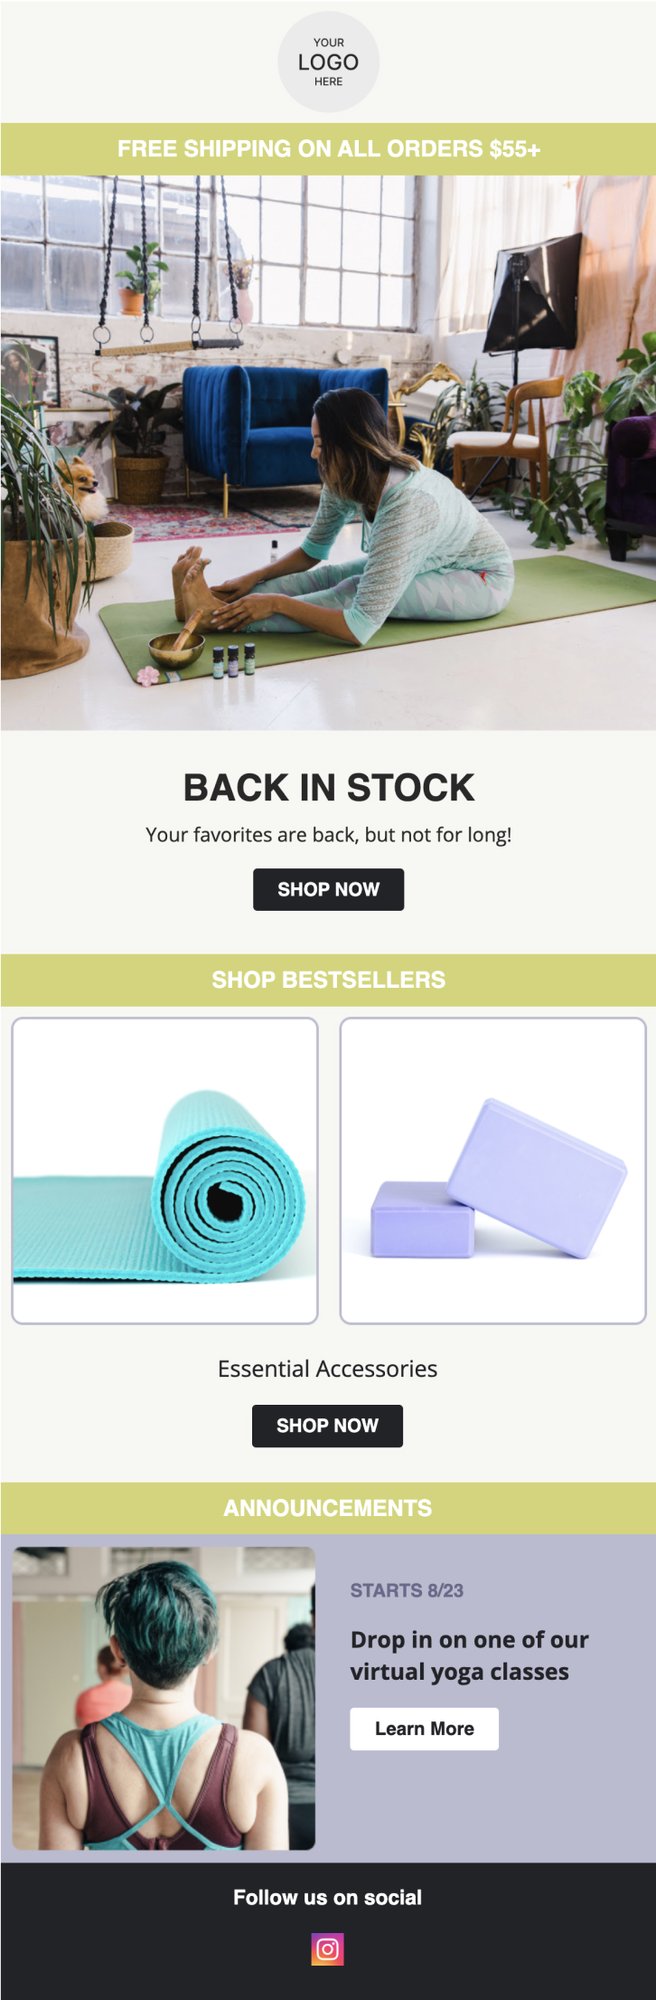 back in stock email template